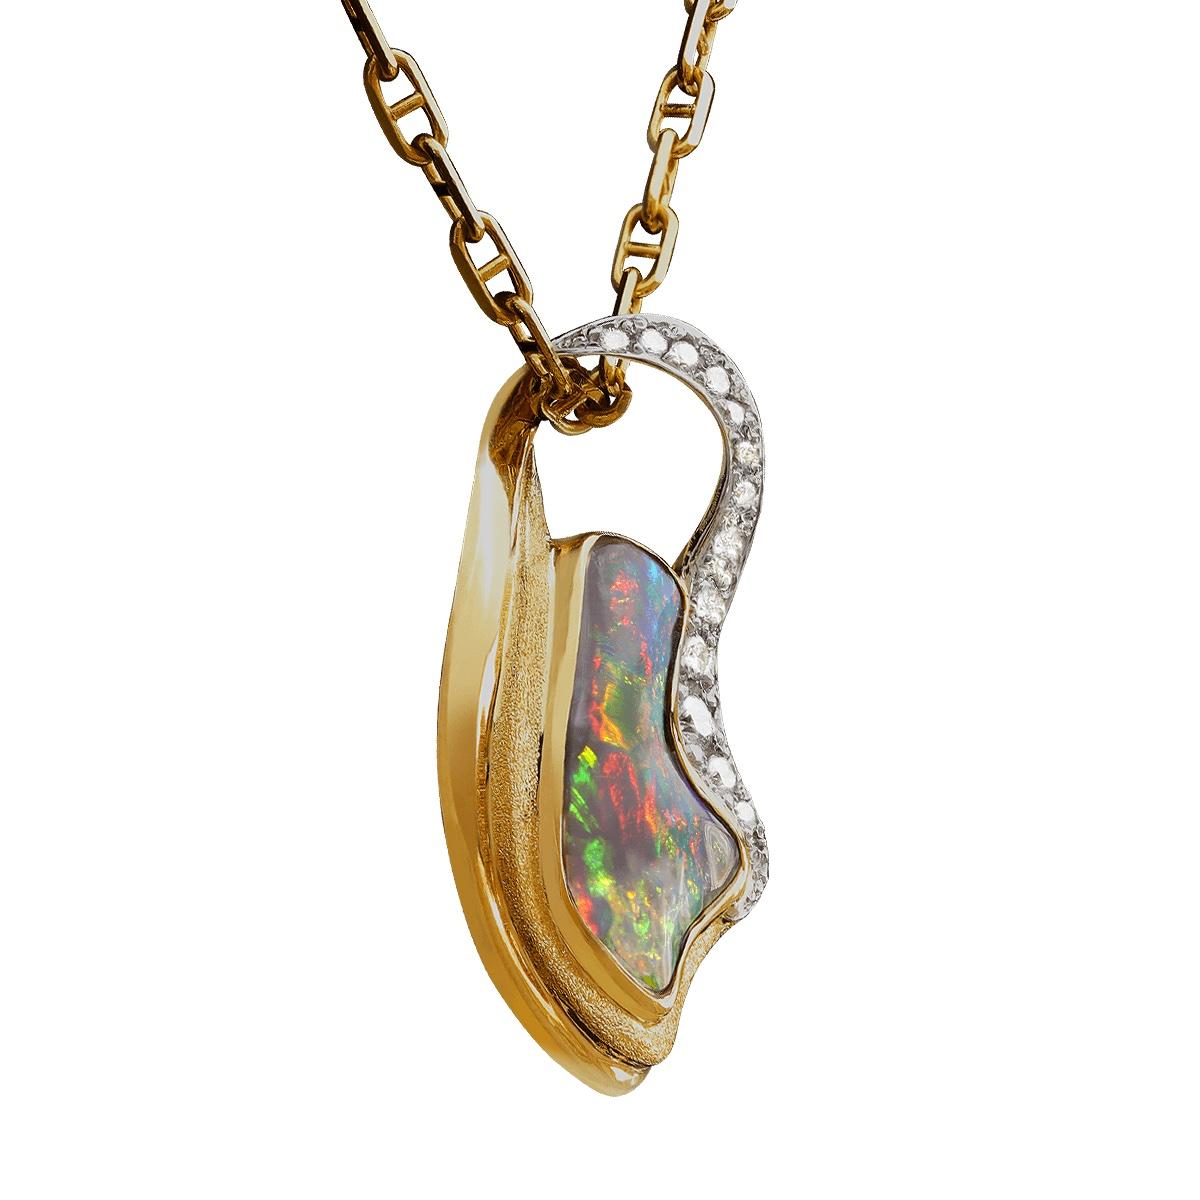 A dark red on black is the most sought after colour combination in all opal. This opulent pendant holds a freeform shaped black opal surrounded in 18K yellow gold and high jewellery grade brilliant white diamonds that are set in